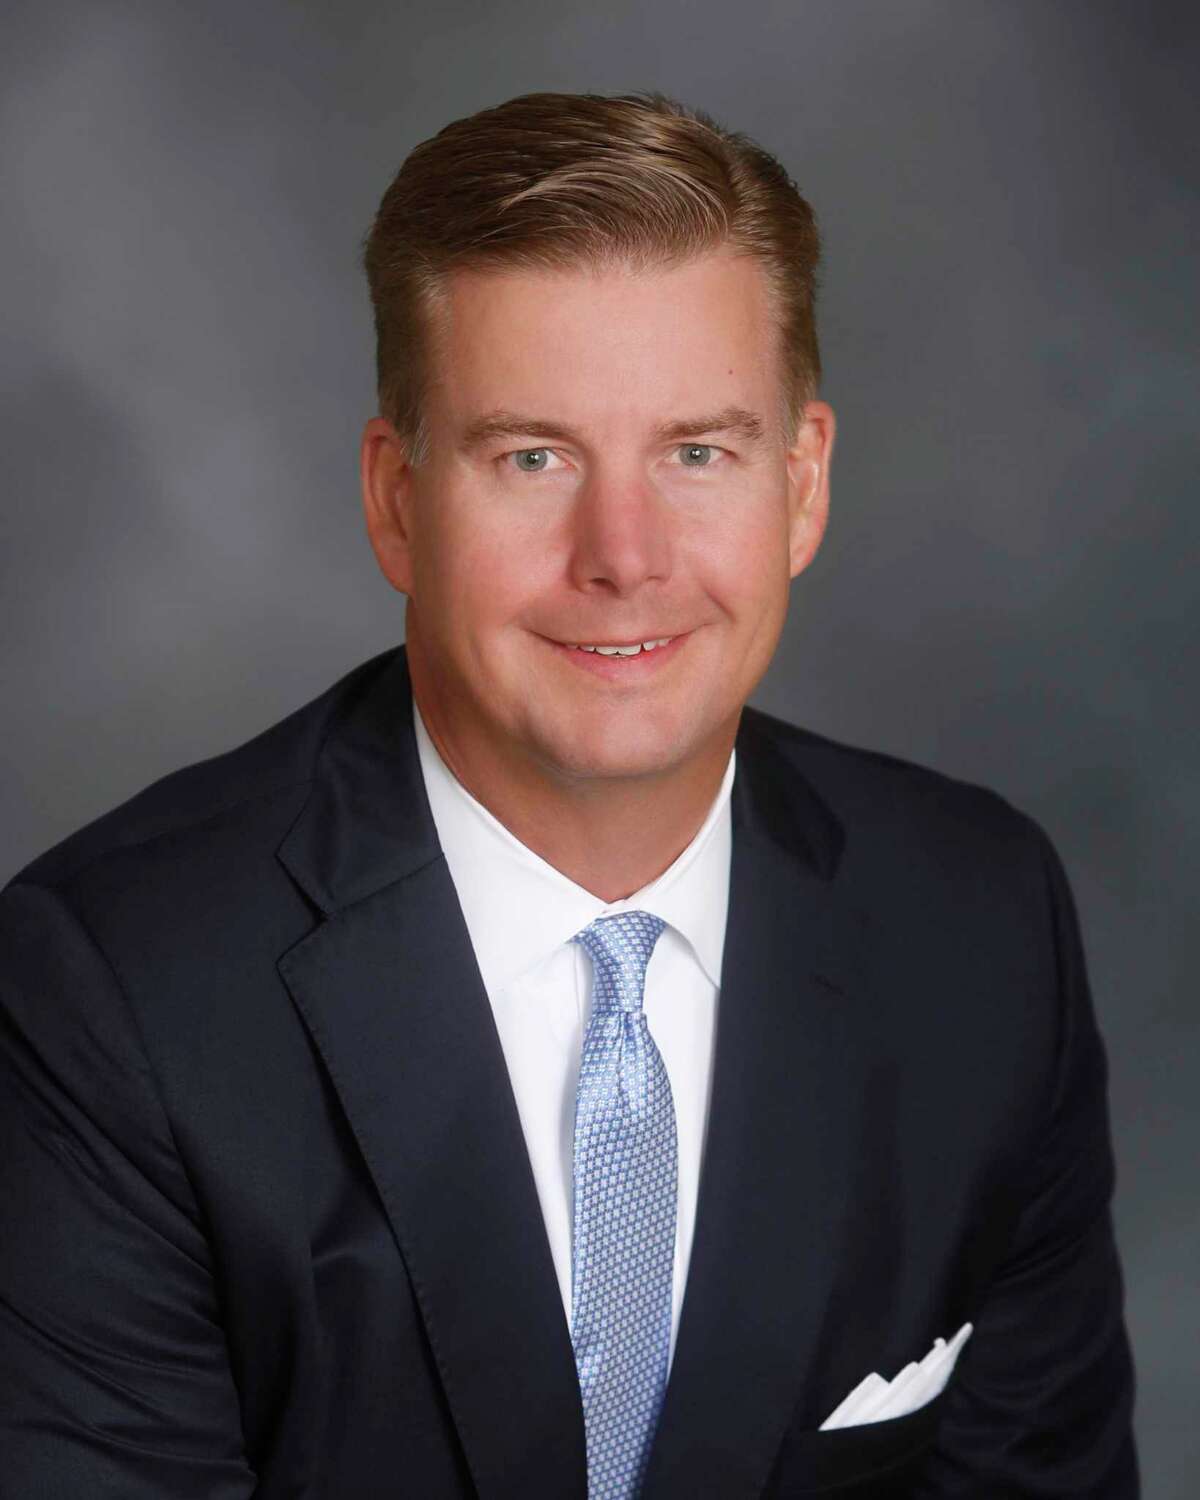 Jonathan Homeyer is president and chief lending officer of Gulf Capital Bank.